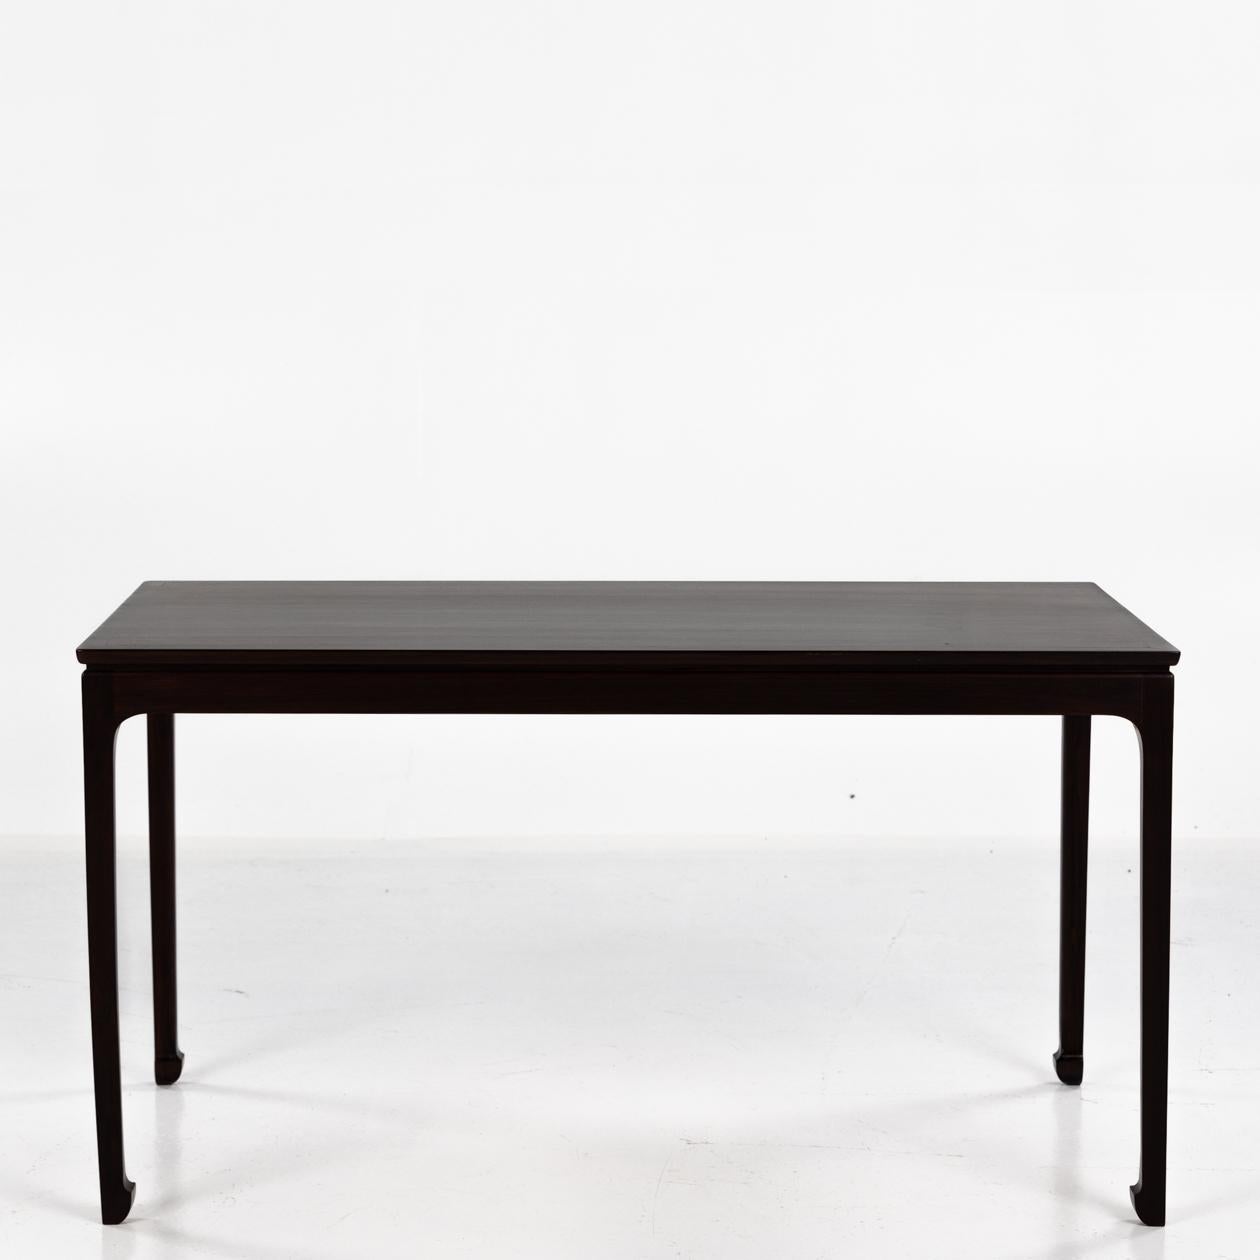 Coffee table in dark rosewood with detailed legs.
Designed by Ole Wanscher for cabinetmaker AJ Iversen.